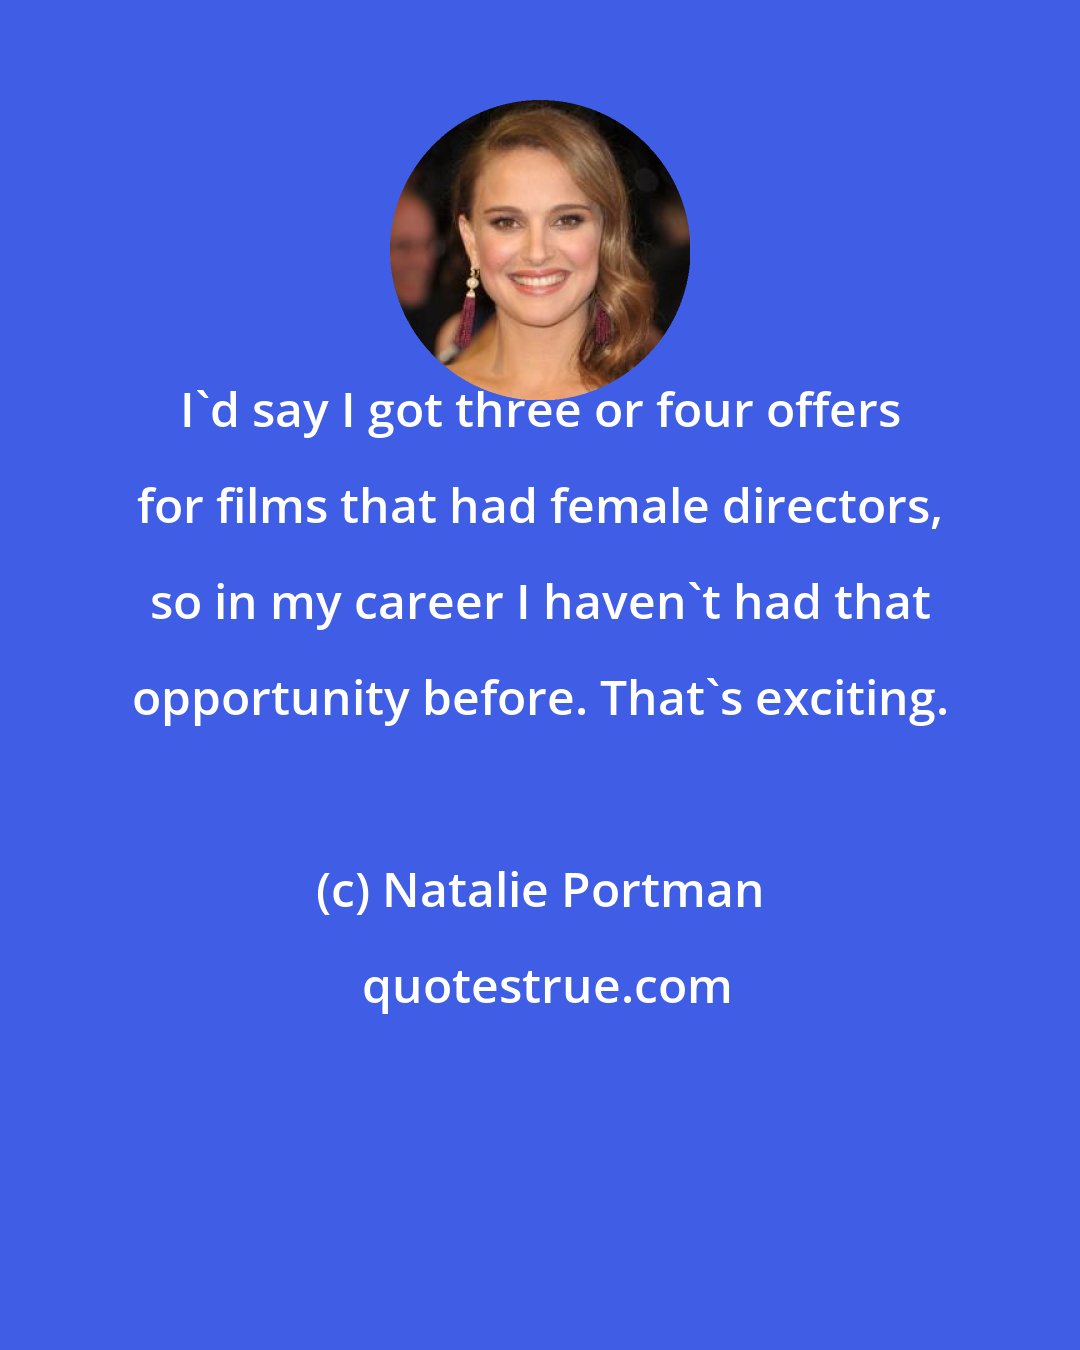 Natalie Portman: I'd say I got three or four offers for films that had female directors, so in my career I haven't had that opportunity before. That's exciting.